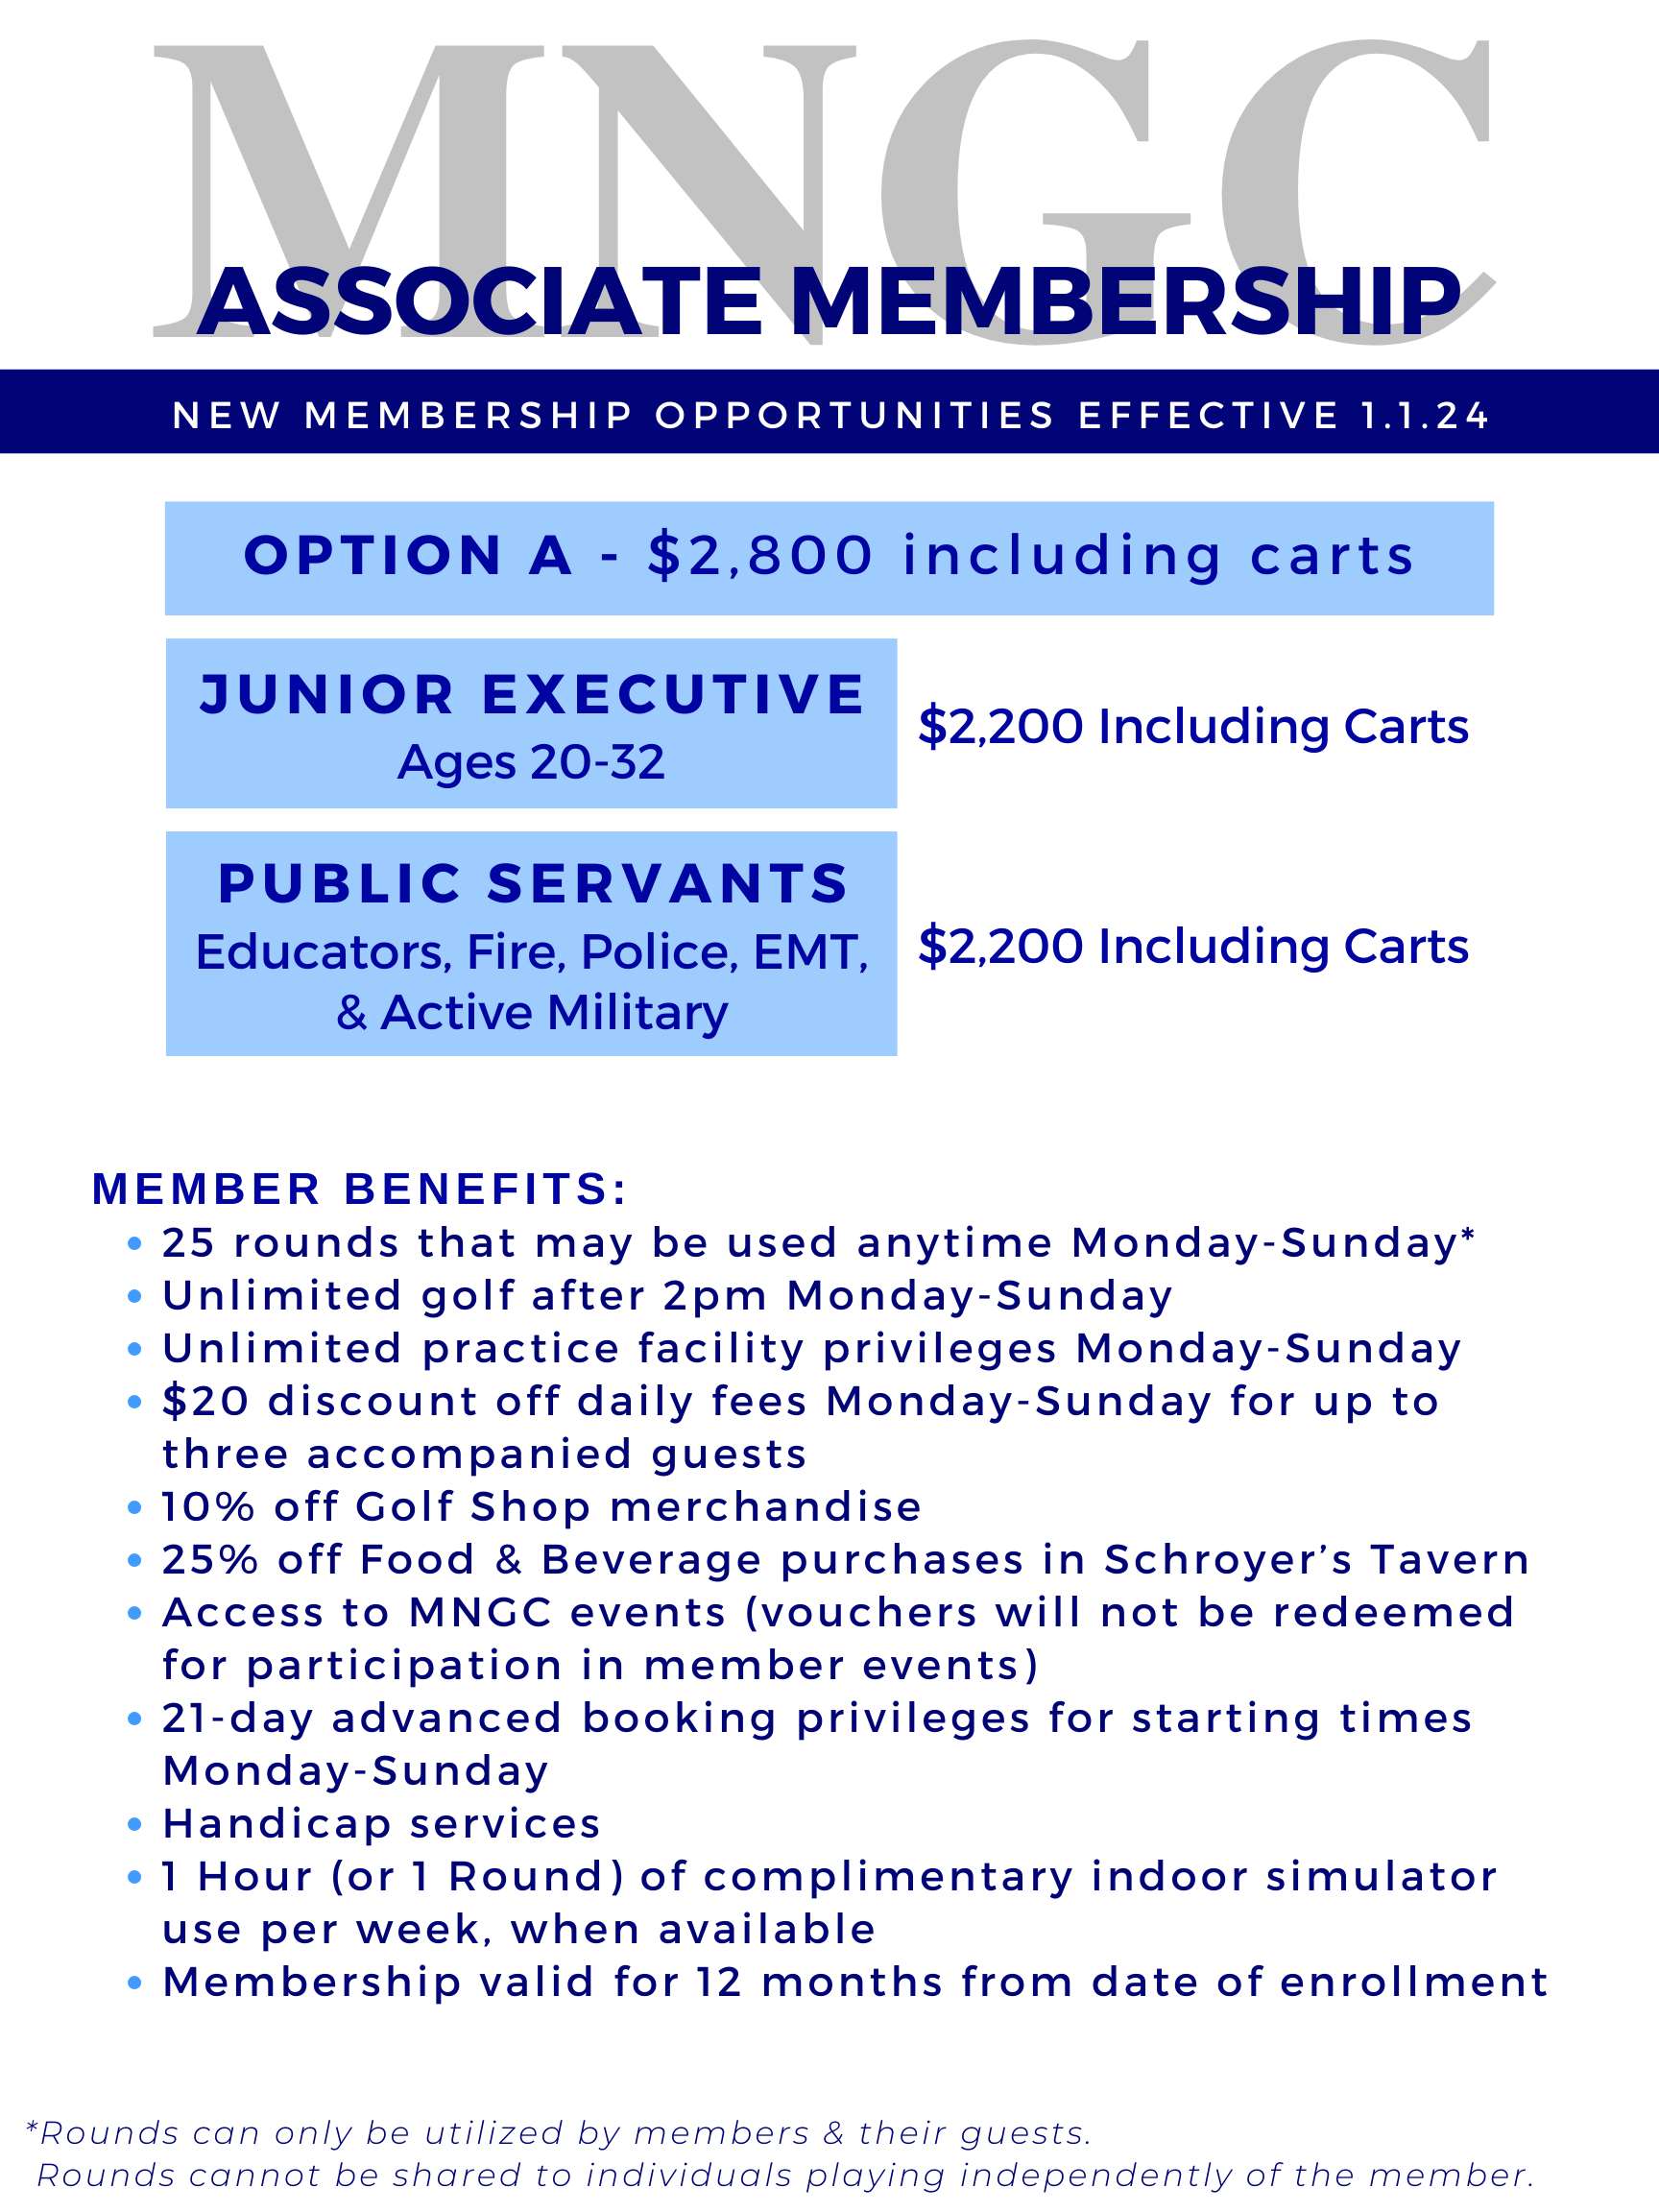 Learn more about our Associate A Membership, effective 1.1.24!